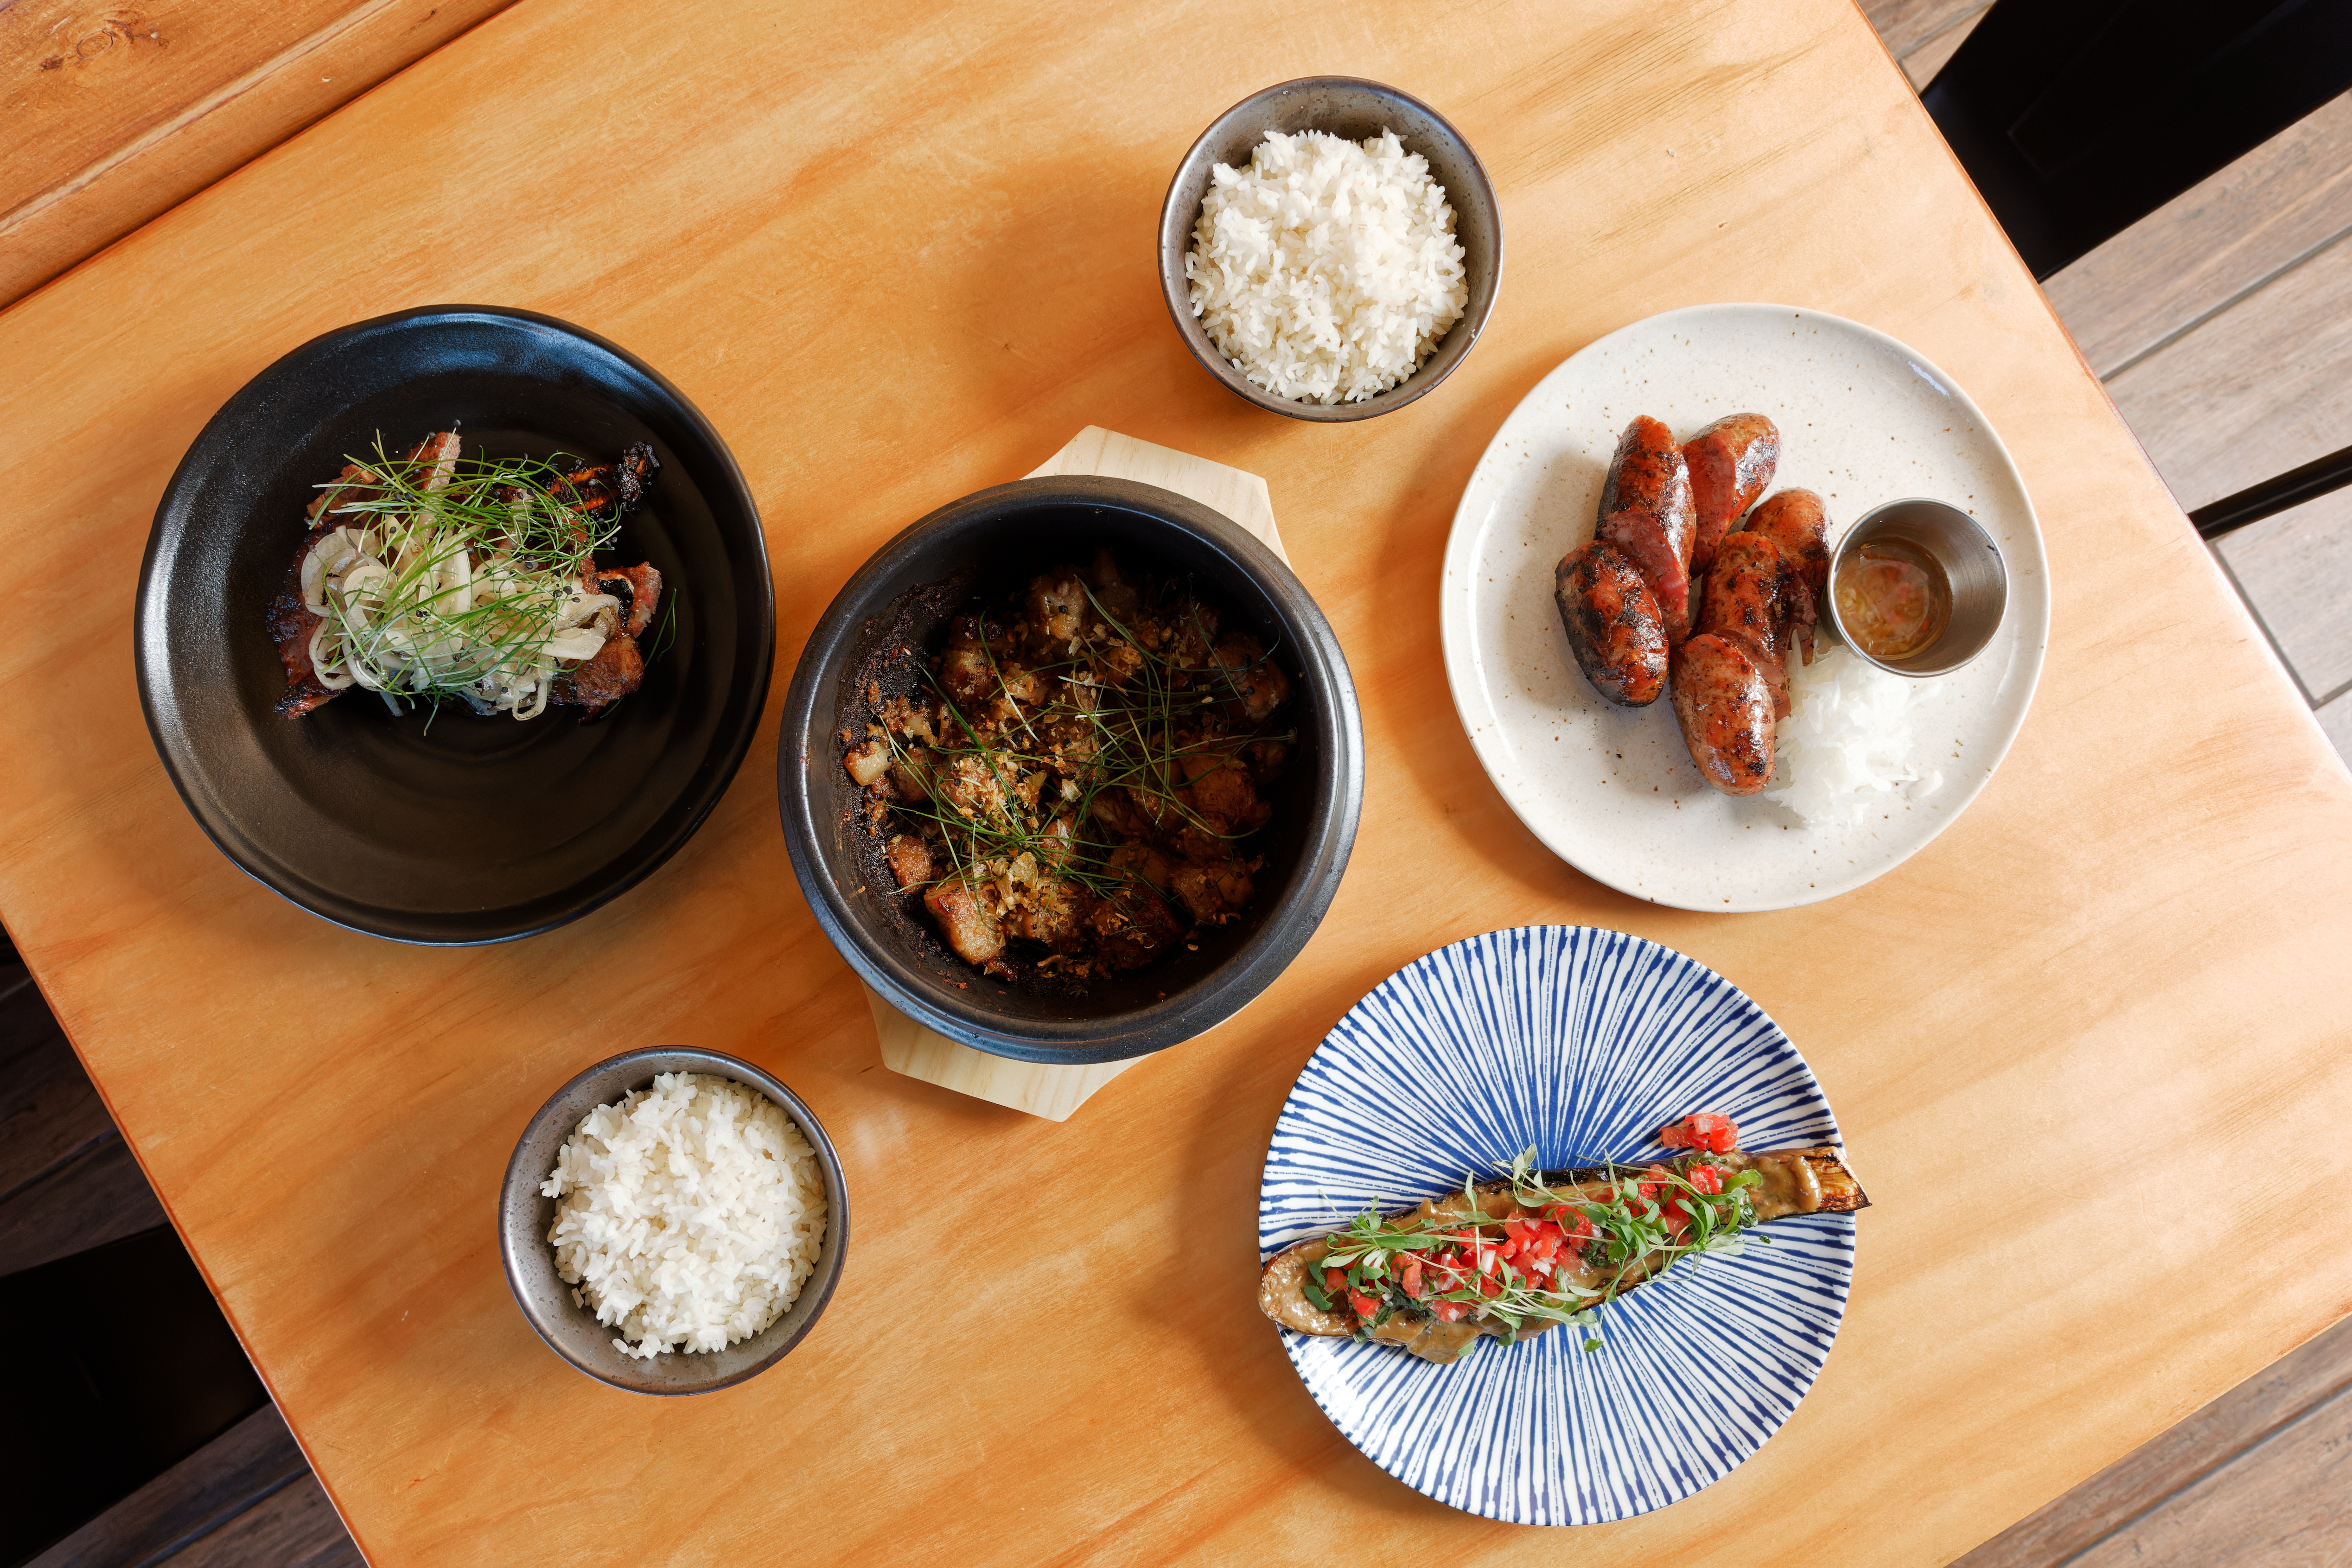 A wooden table laid with six dishes of various sizes, including bowls of rice and sliced sausage.